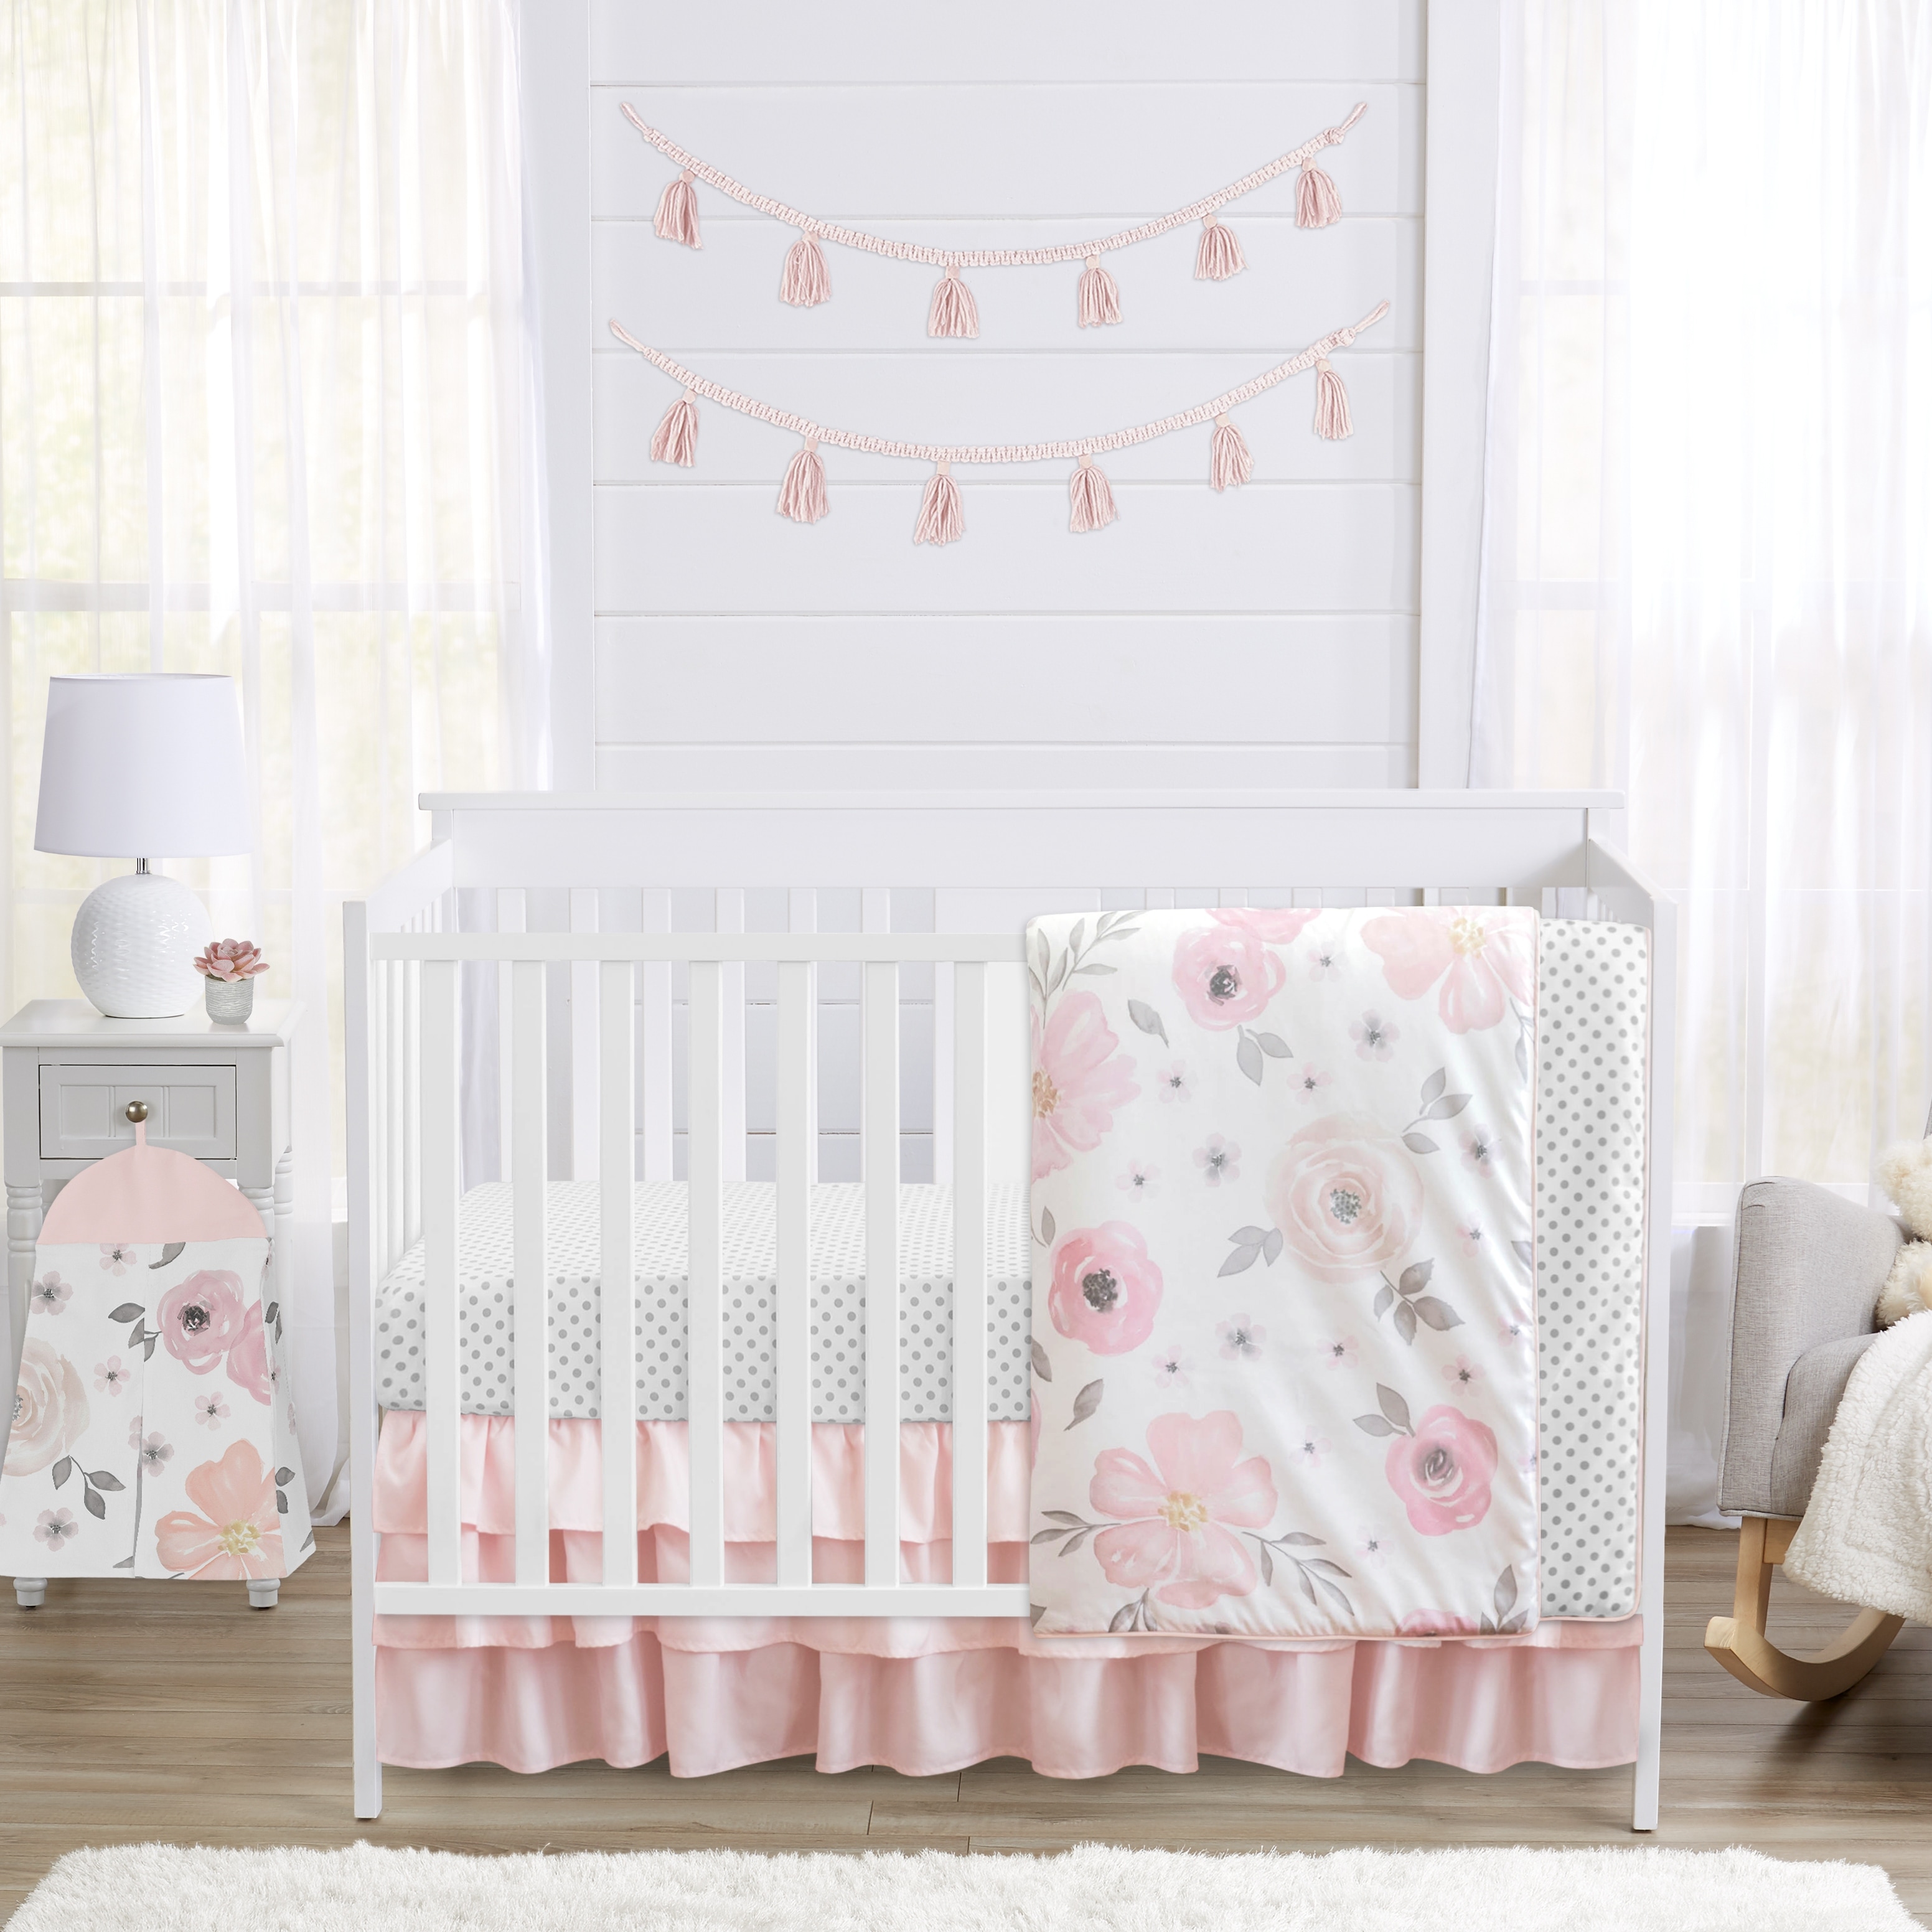 Sweet Jojo Designs Pink, Grey & White Shabby Chic Watercolor Floral Collection Baby Girl 4-piece Bumperless Crib Bedding Set